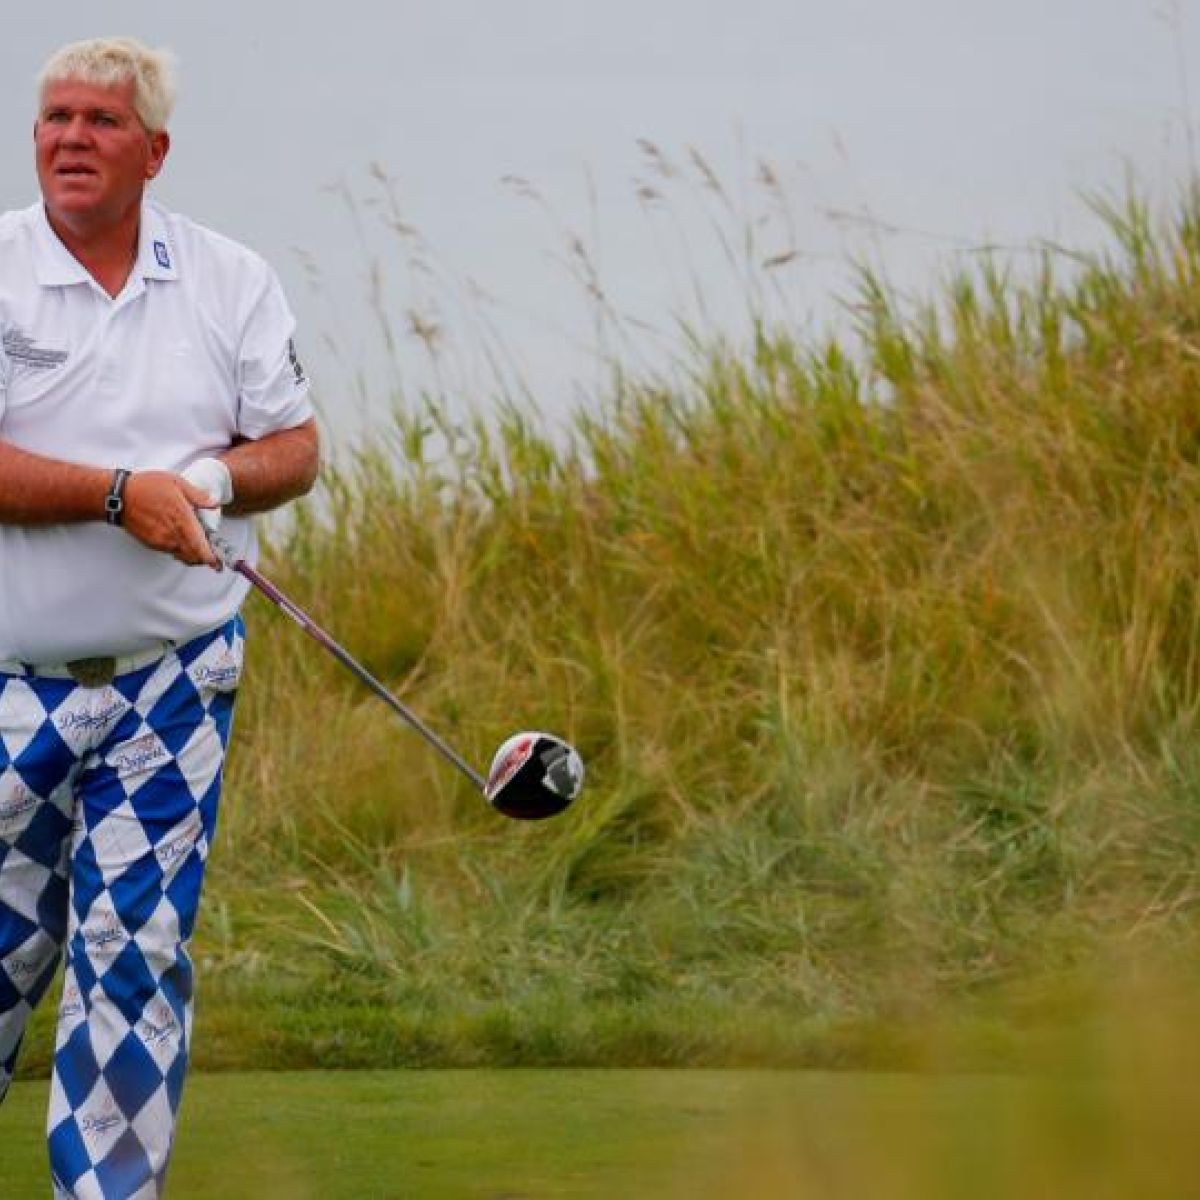 John Daly Hospitalised After Collapsing On Golf Course